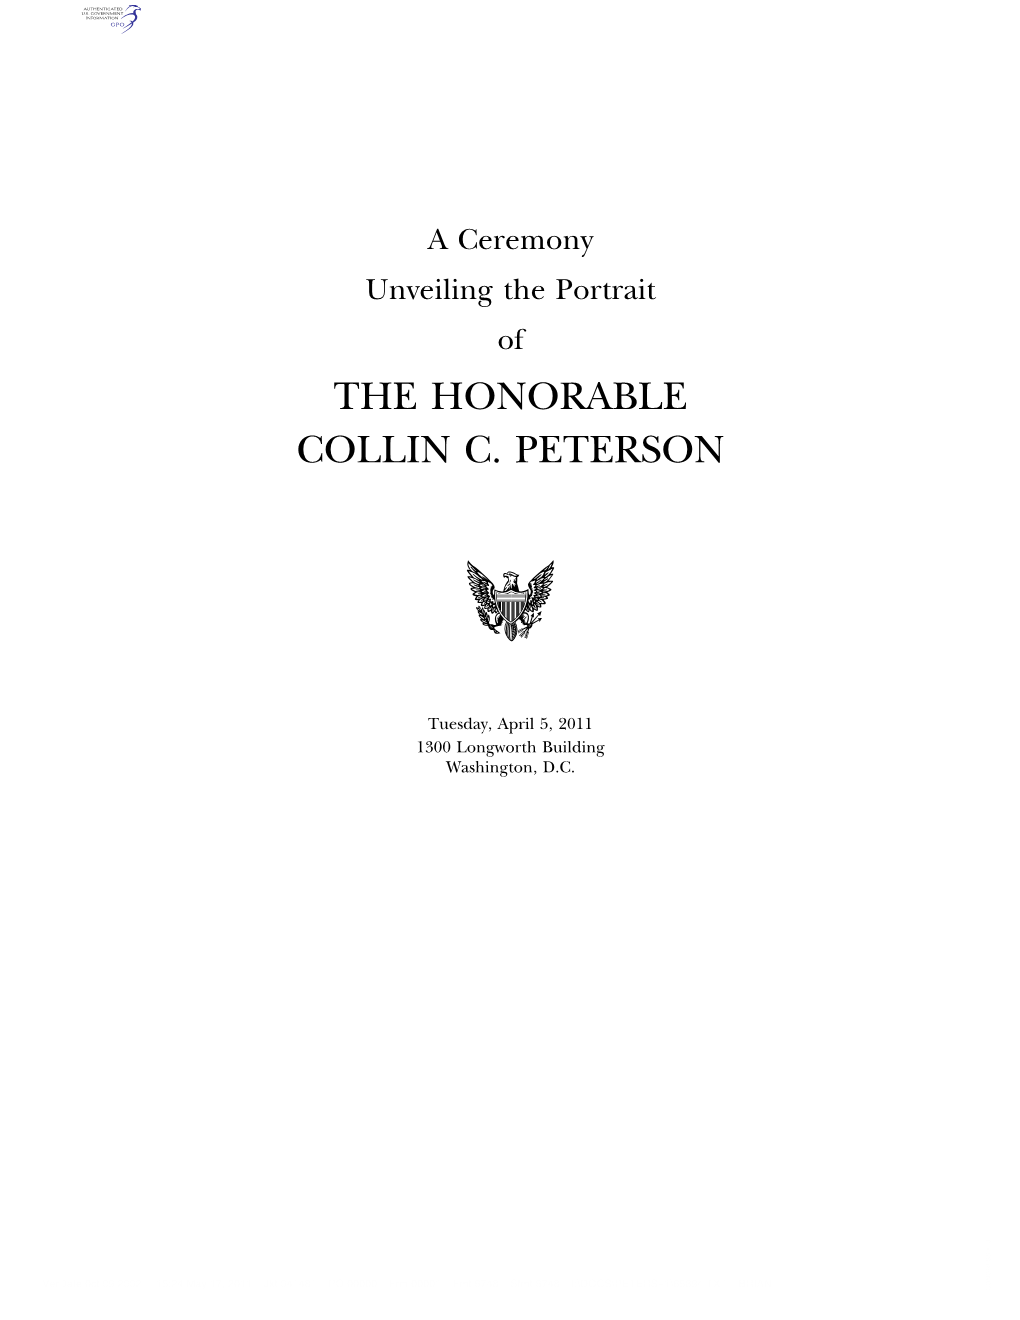 The Honorable Collin C. Peterson